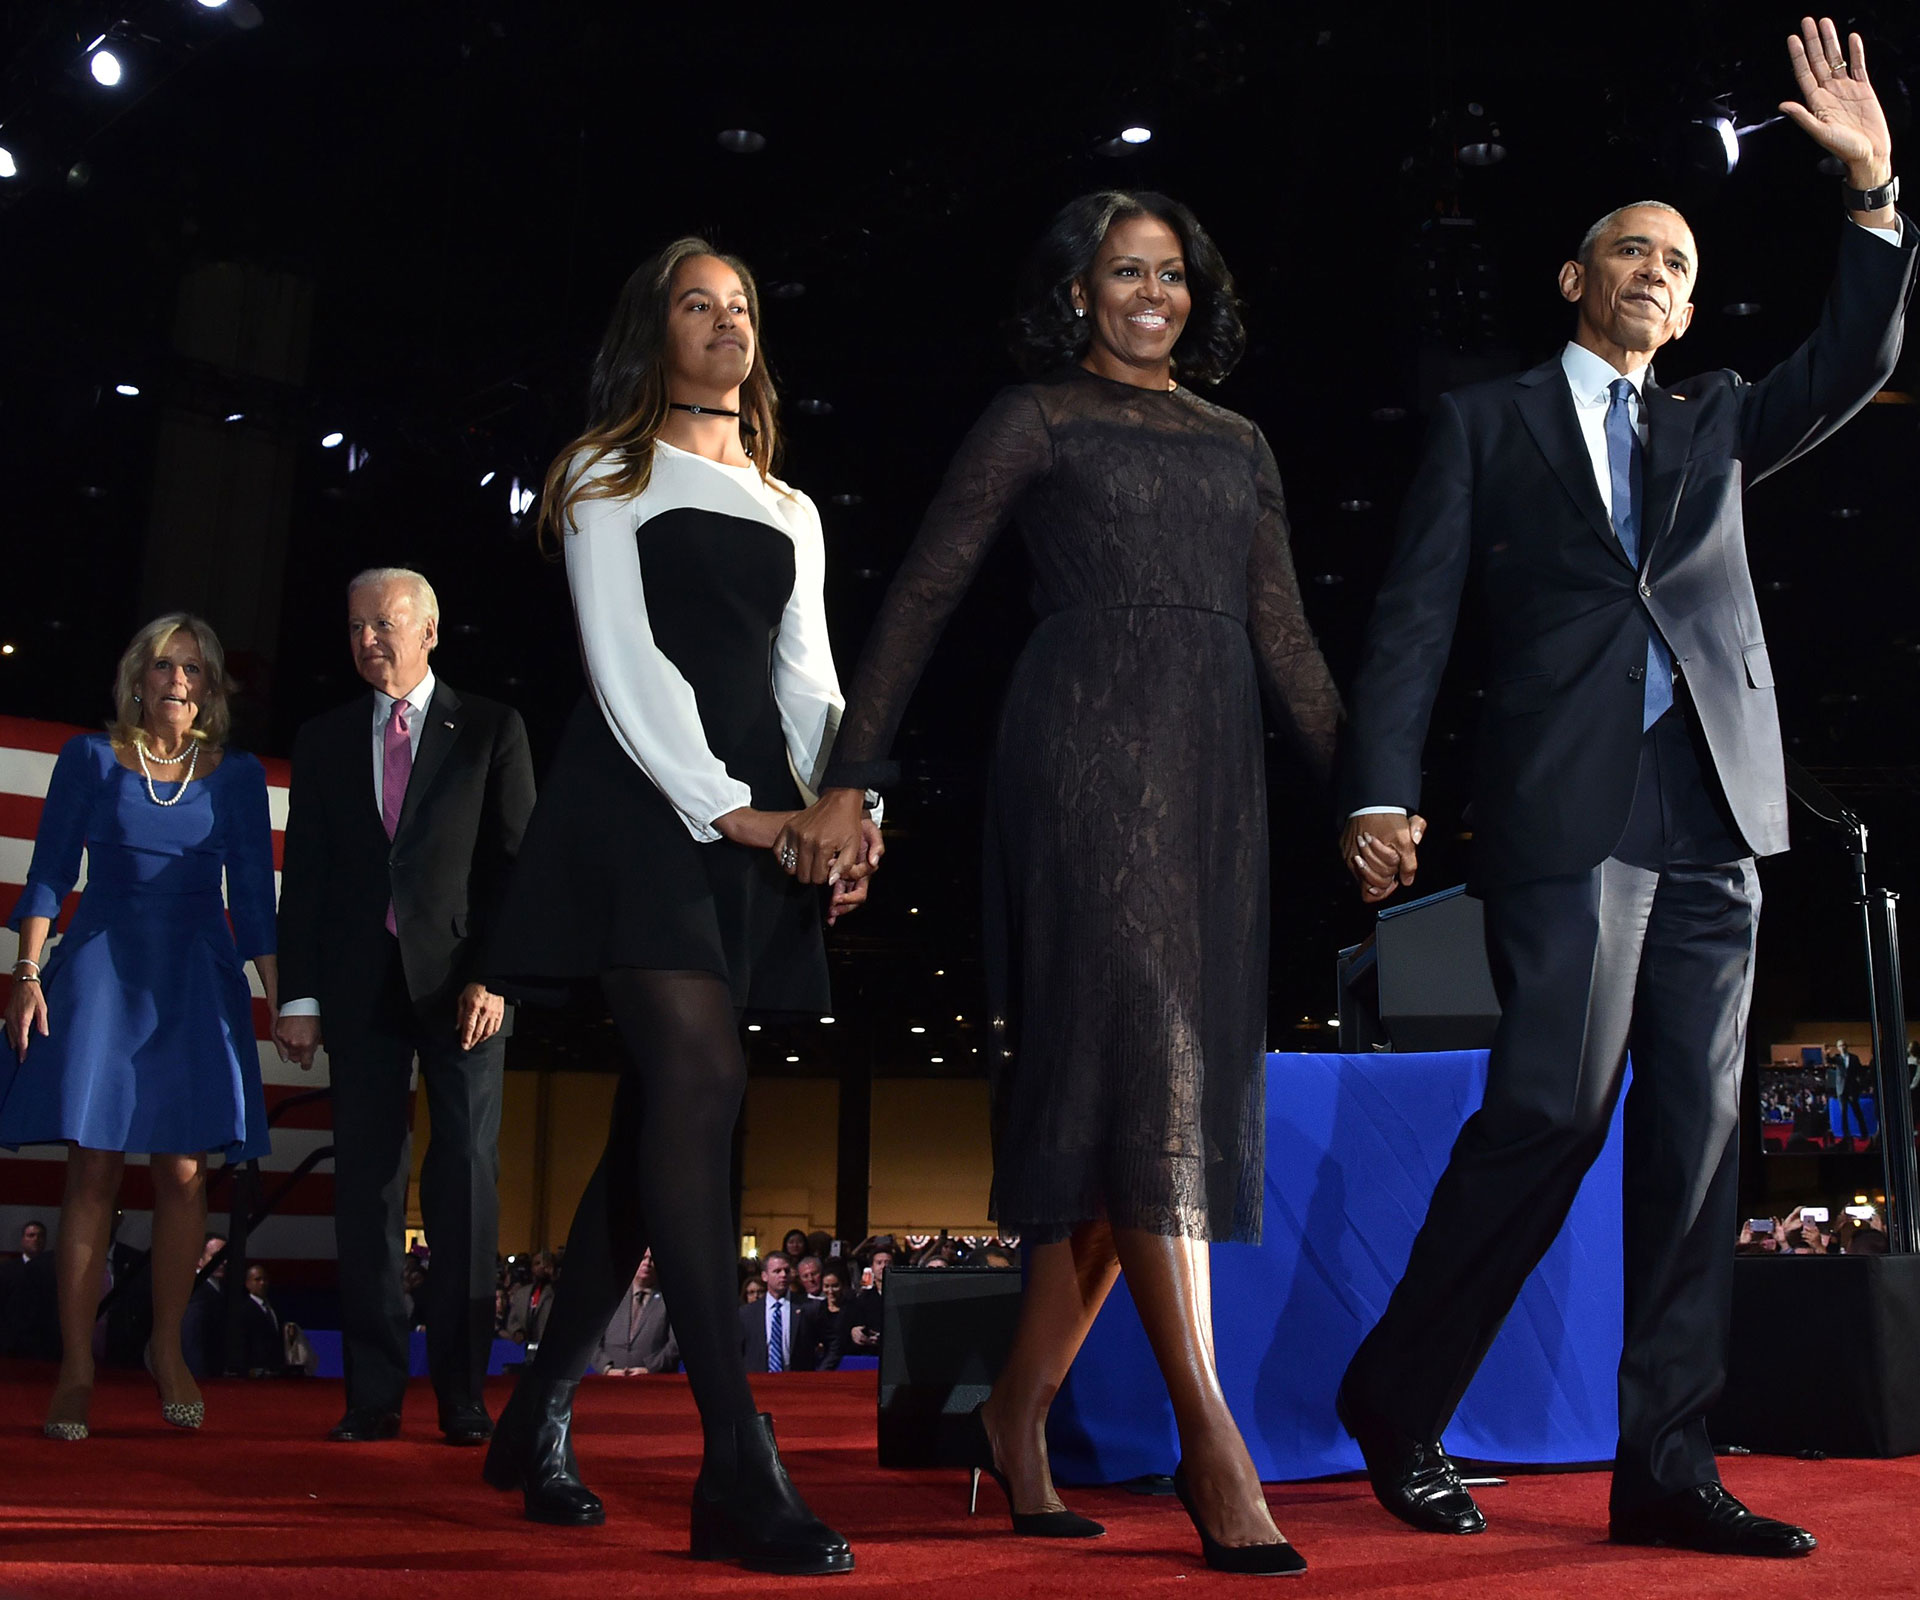 The special meaning behind Michelle Obama’s dress for the Farewell Address, revealed